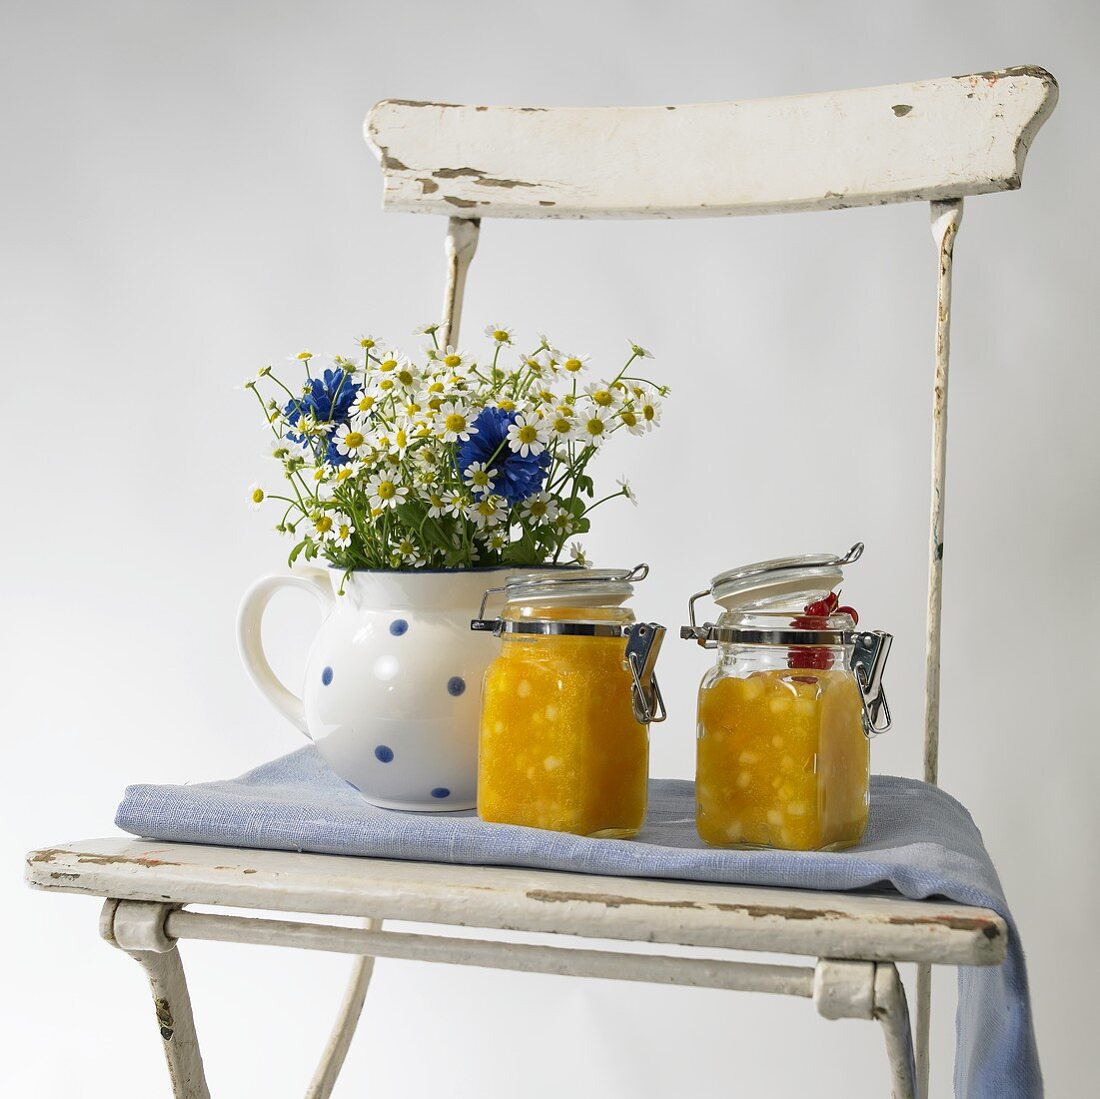 Pineapple jam and a bunch of meadow flowers on a garden chair